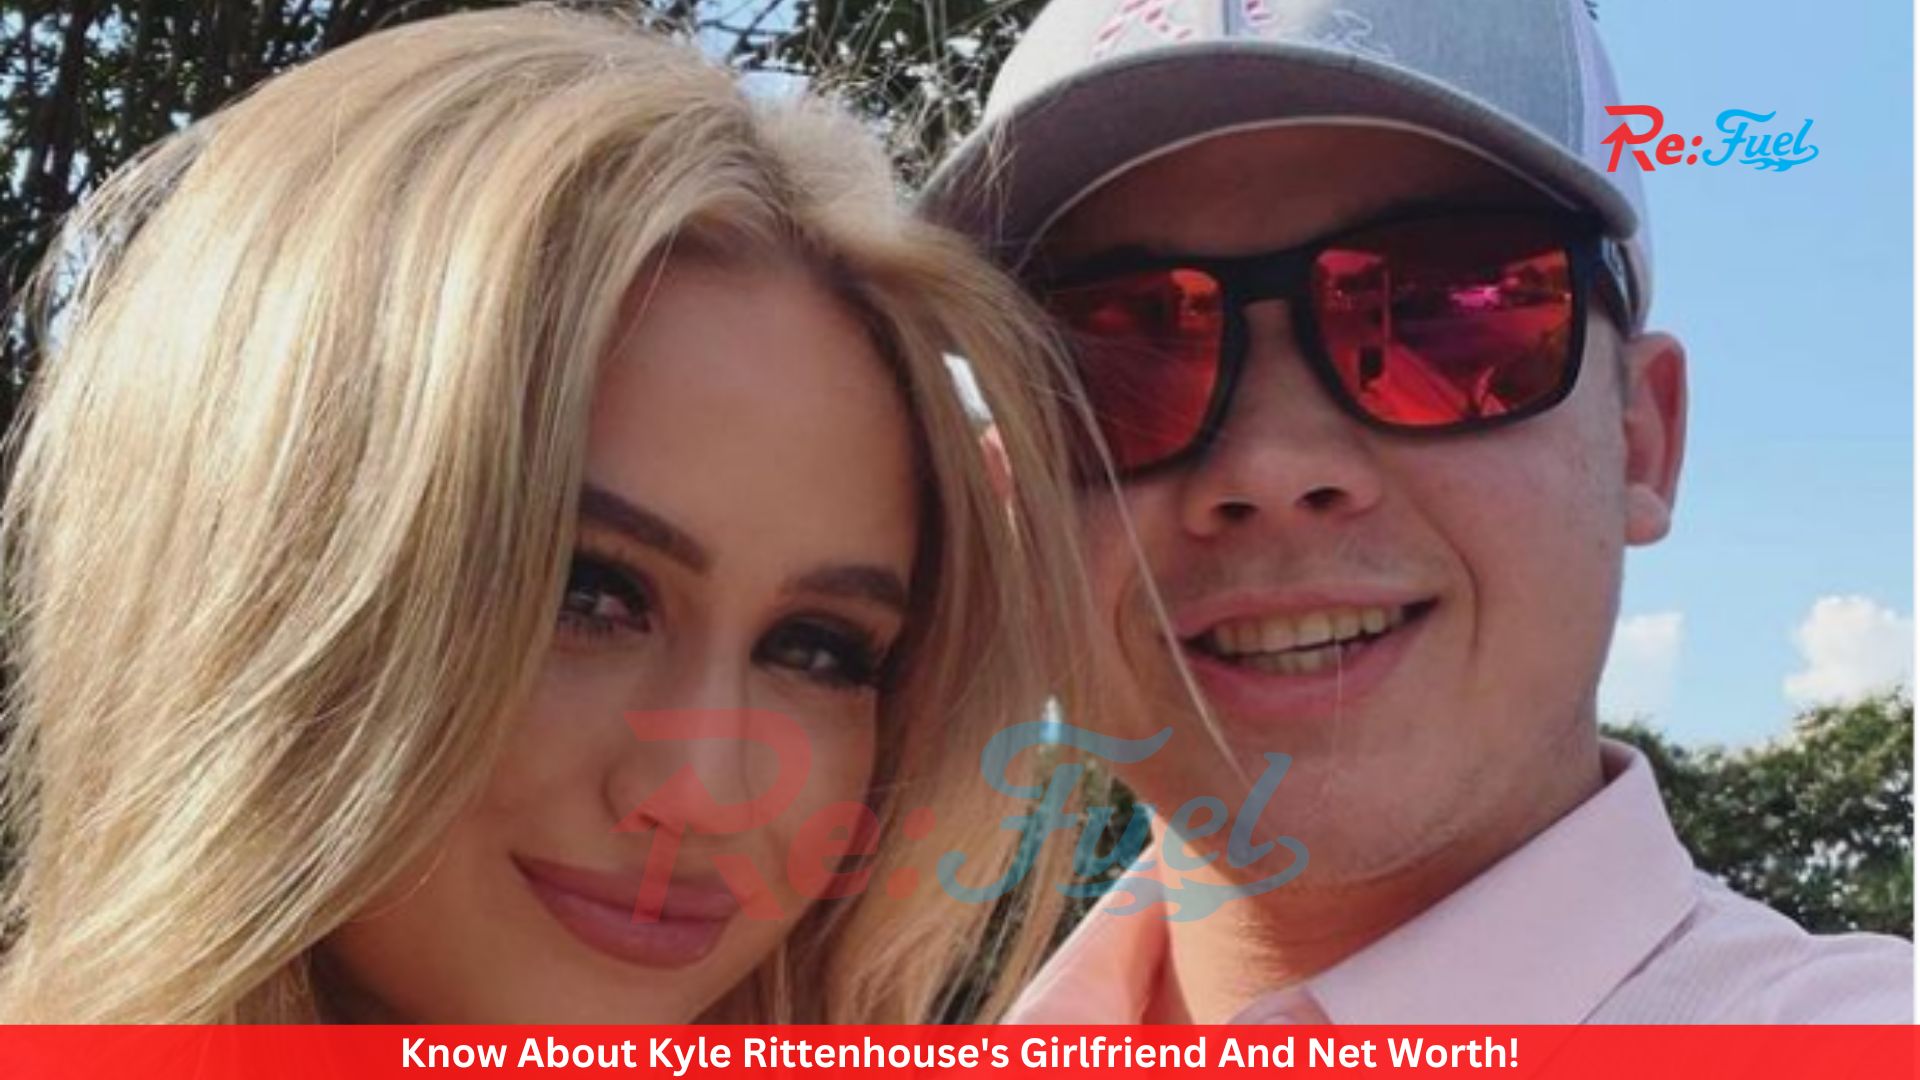 Know About Kyle Rittenhouse's Girlfriend And Net Worth!